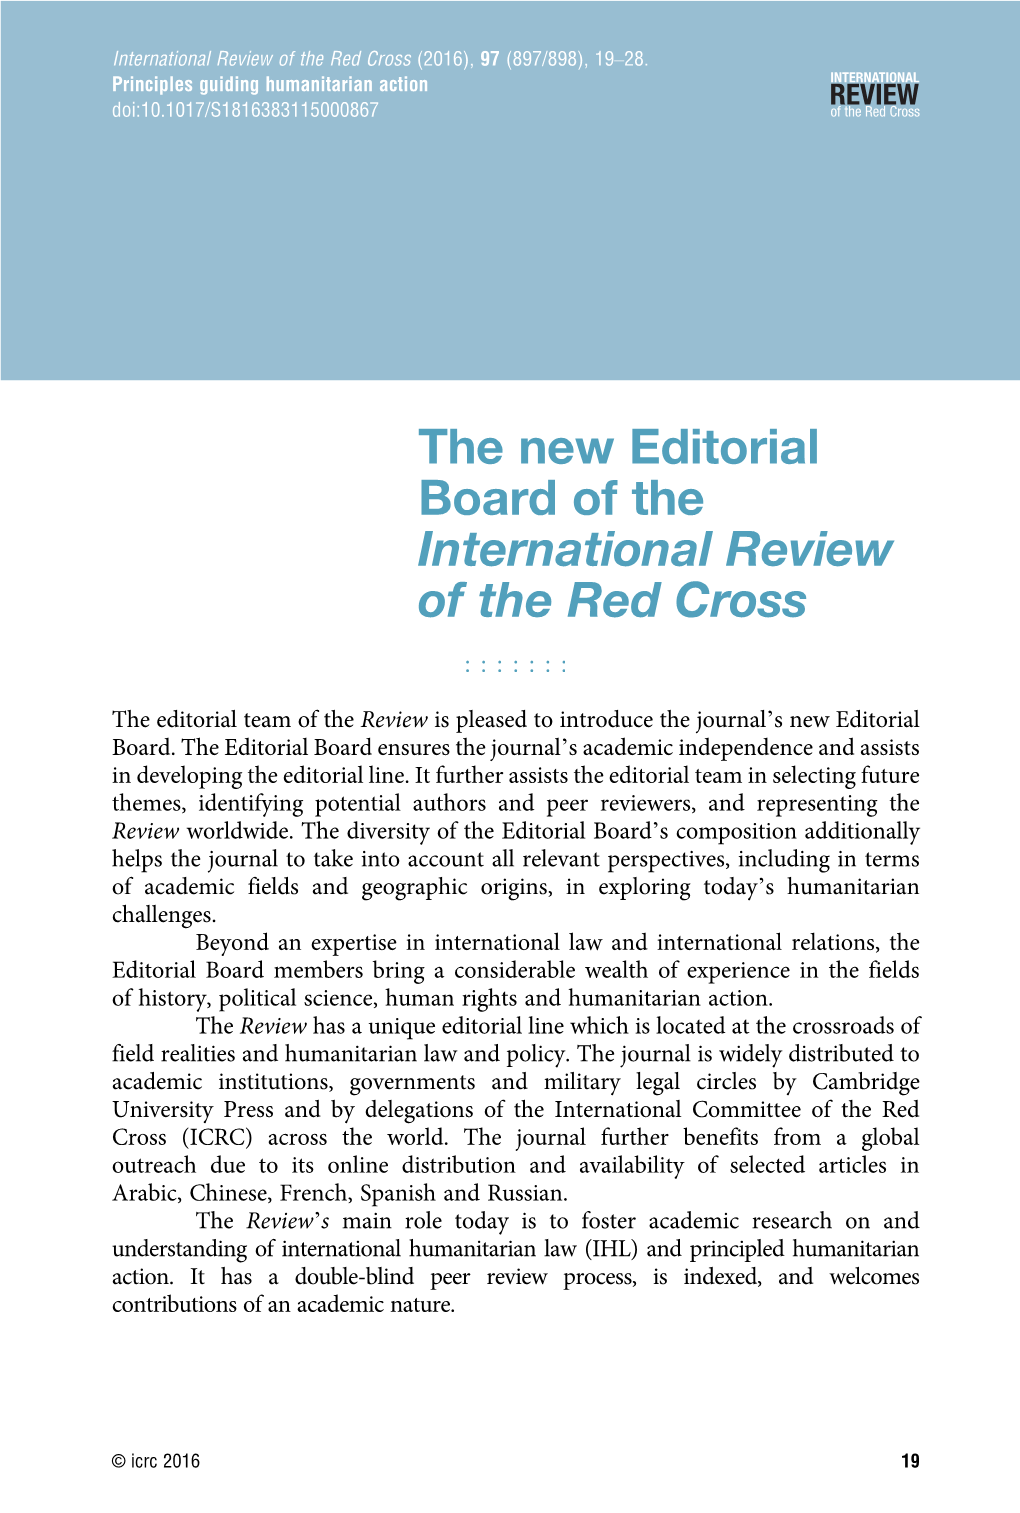 The New Editorial Board of the International Review of the Red Cross